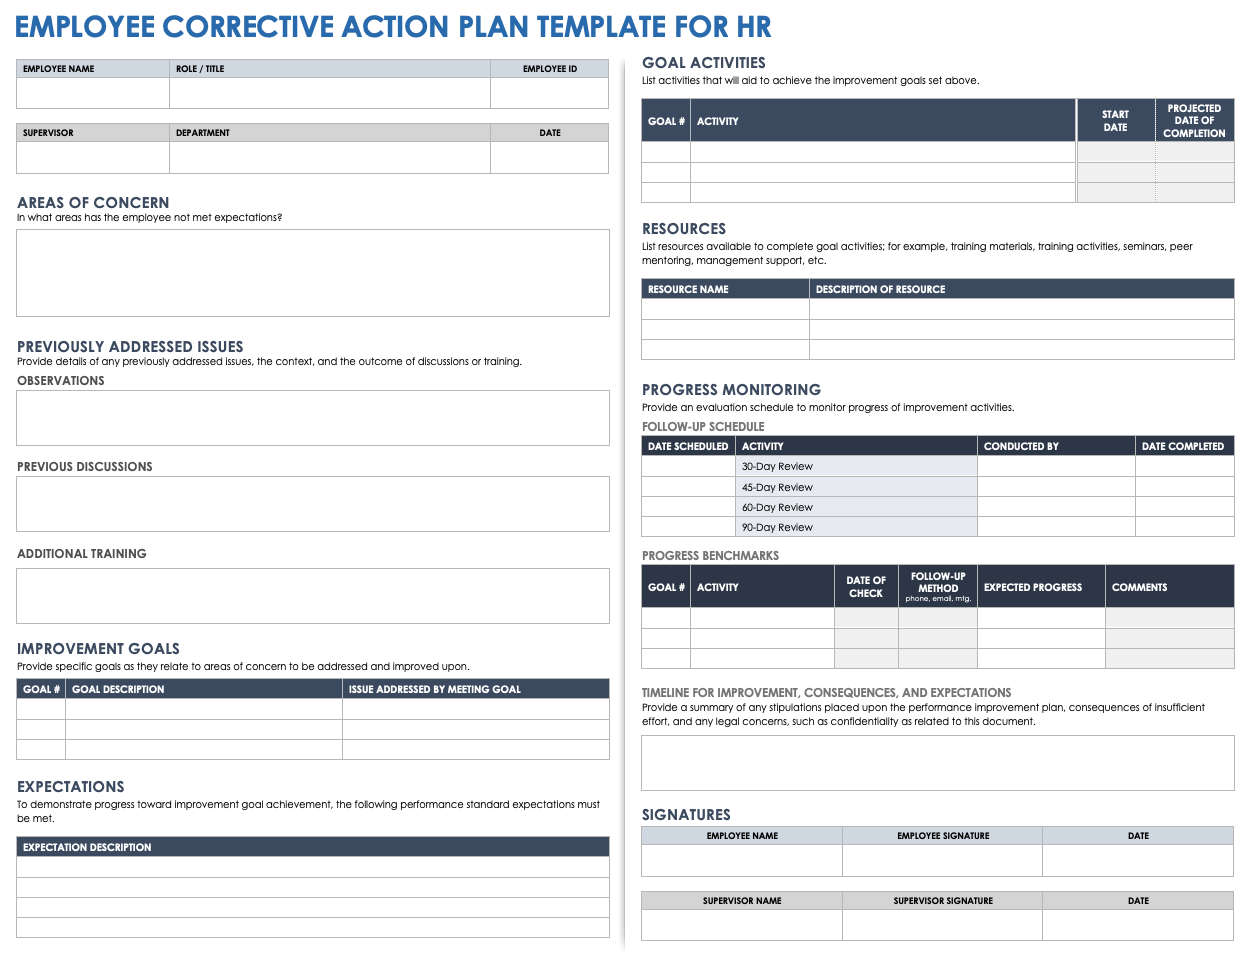 Employee Corrective Action Plan Template for HR